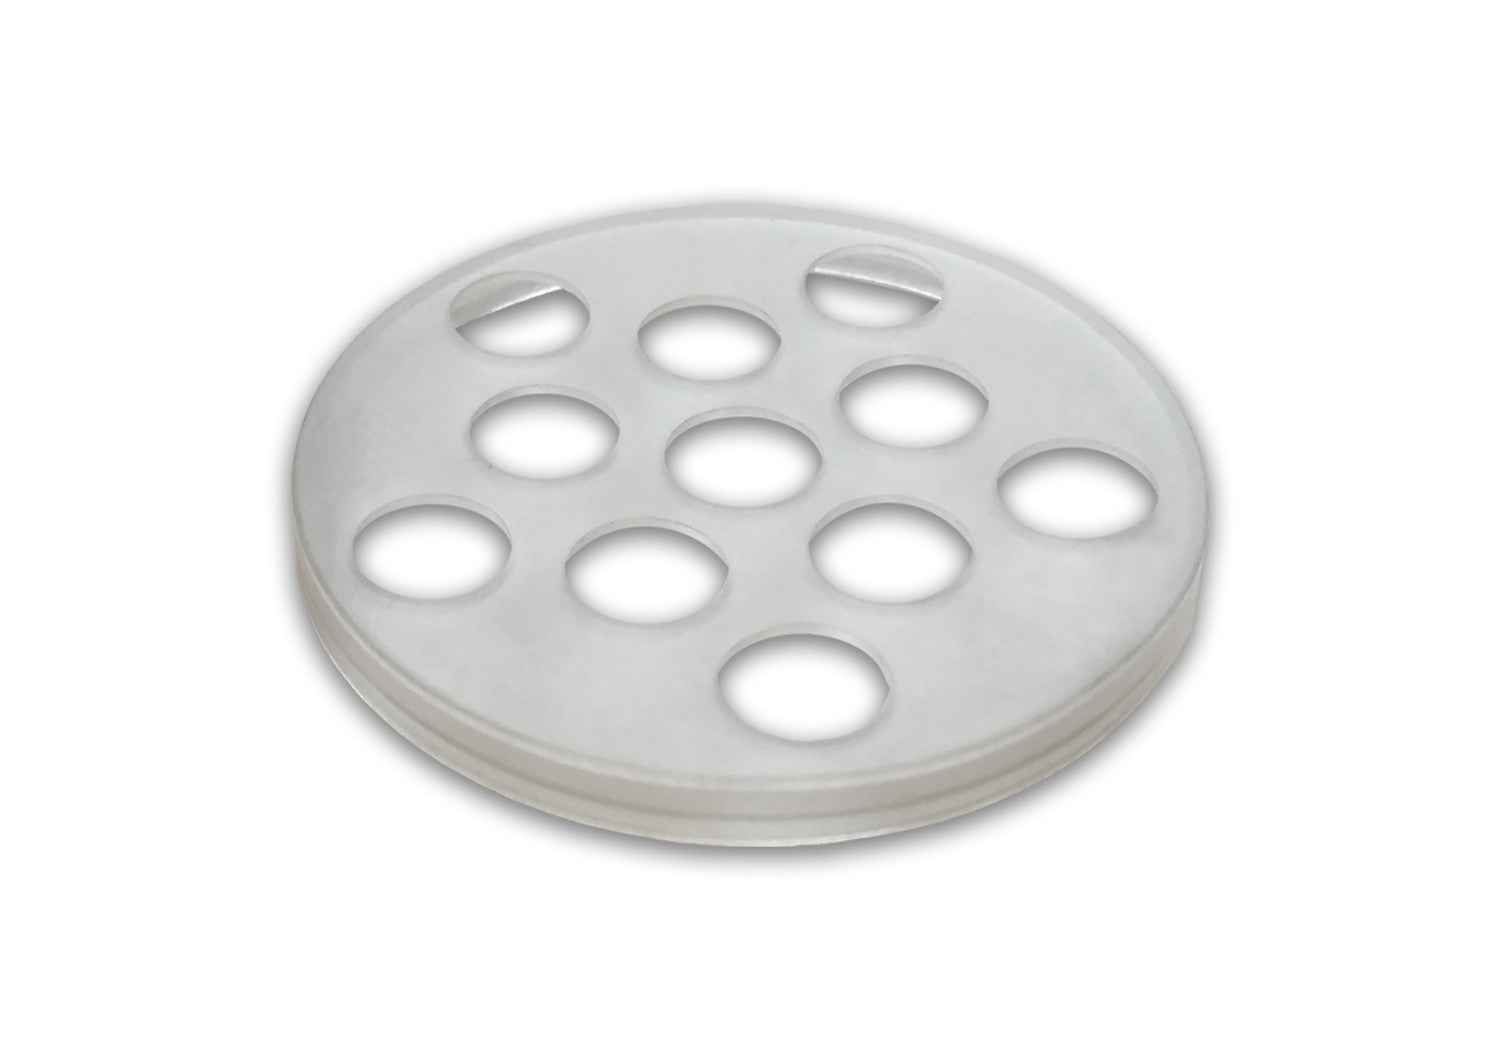 Extra Shaker Tops (set of 10)